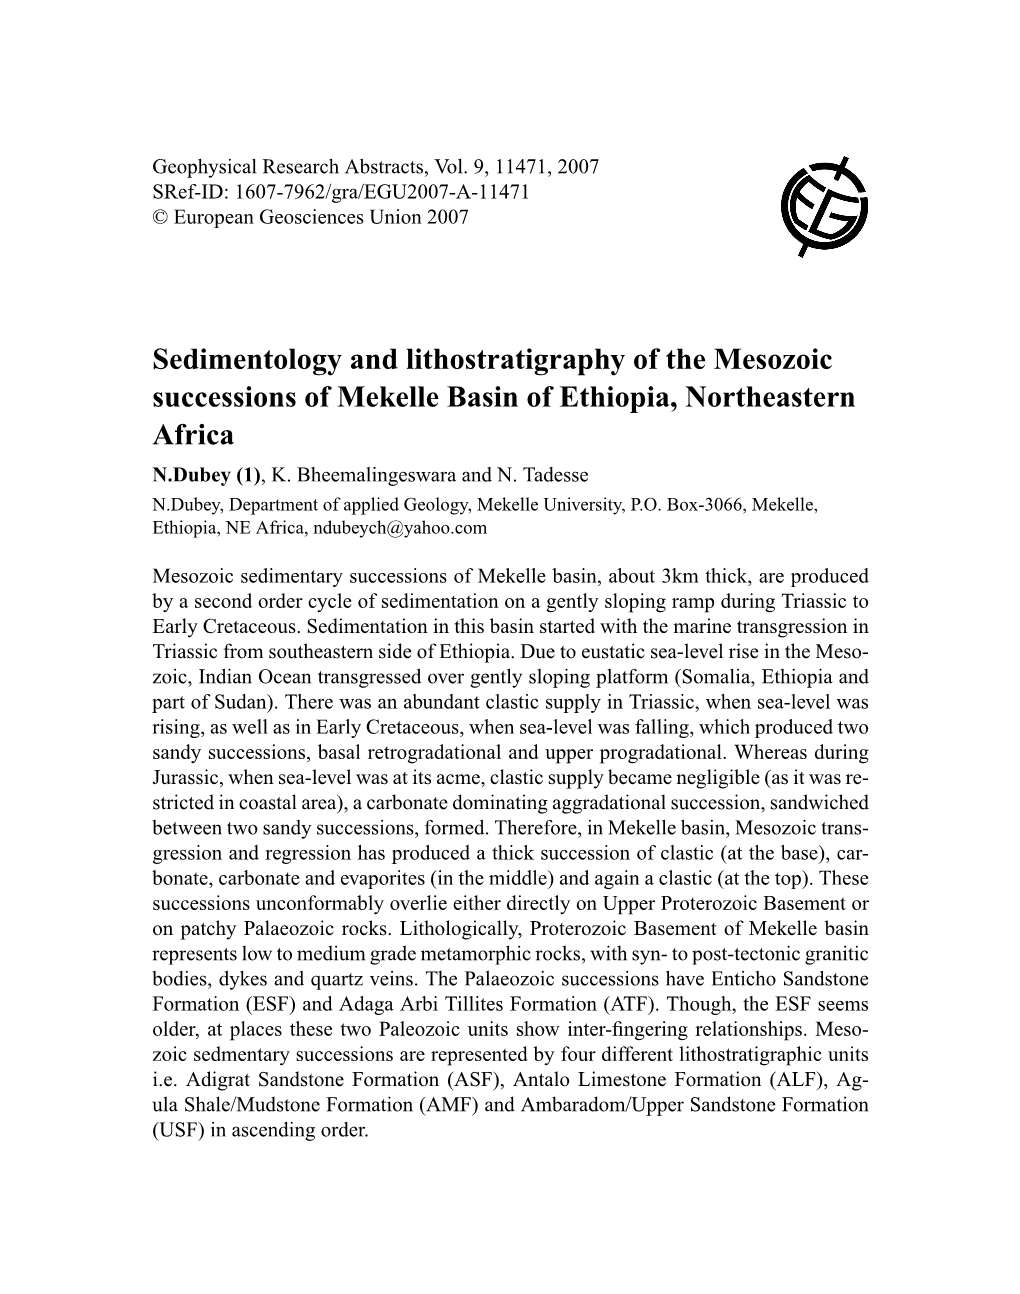 Sedimentology and Lithostratigraphy of the Mesozoic Successions of Mekelle Basin of Ethiopia, Northeastern Africa N.Dubey (1), K